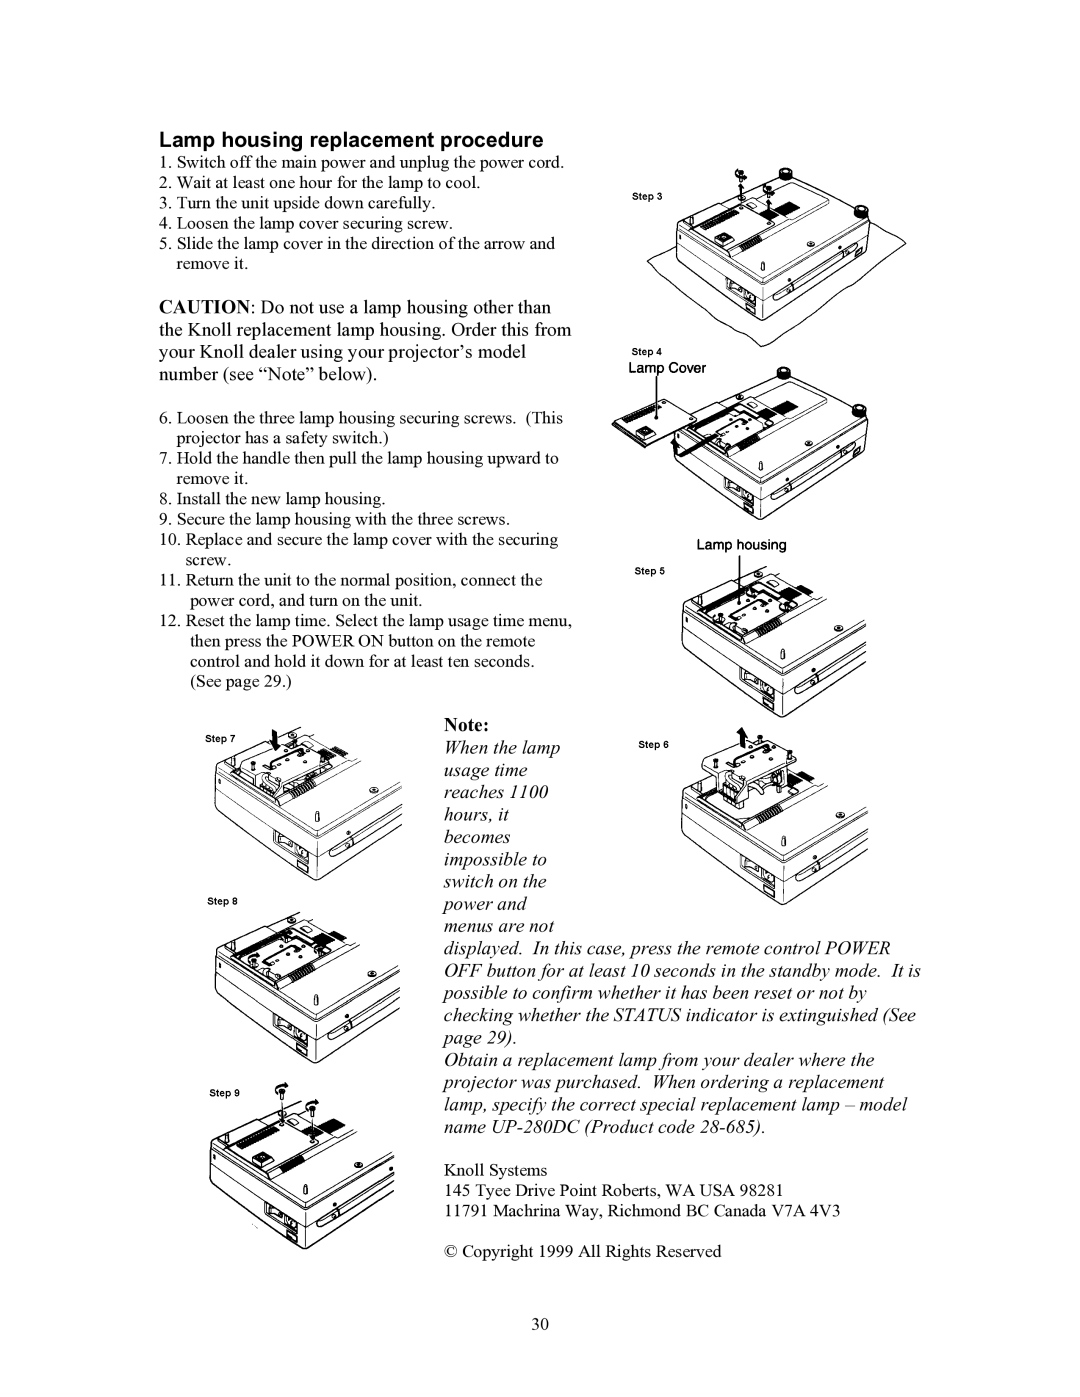 Knoll Systems HT200 user manual Lamp housing replacement procedure 